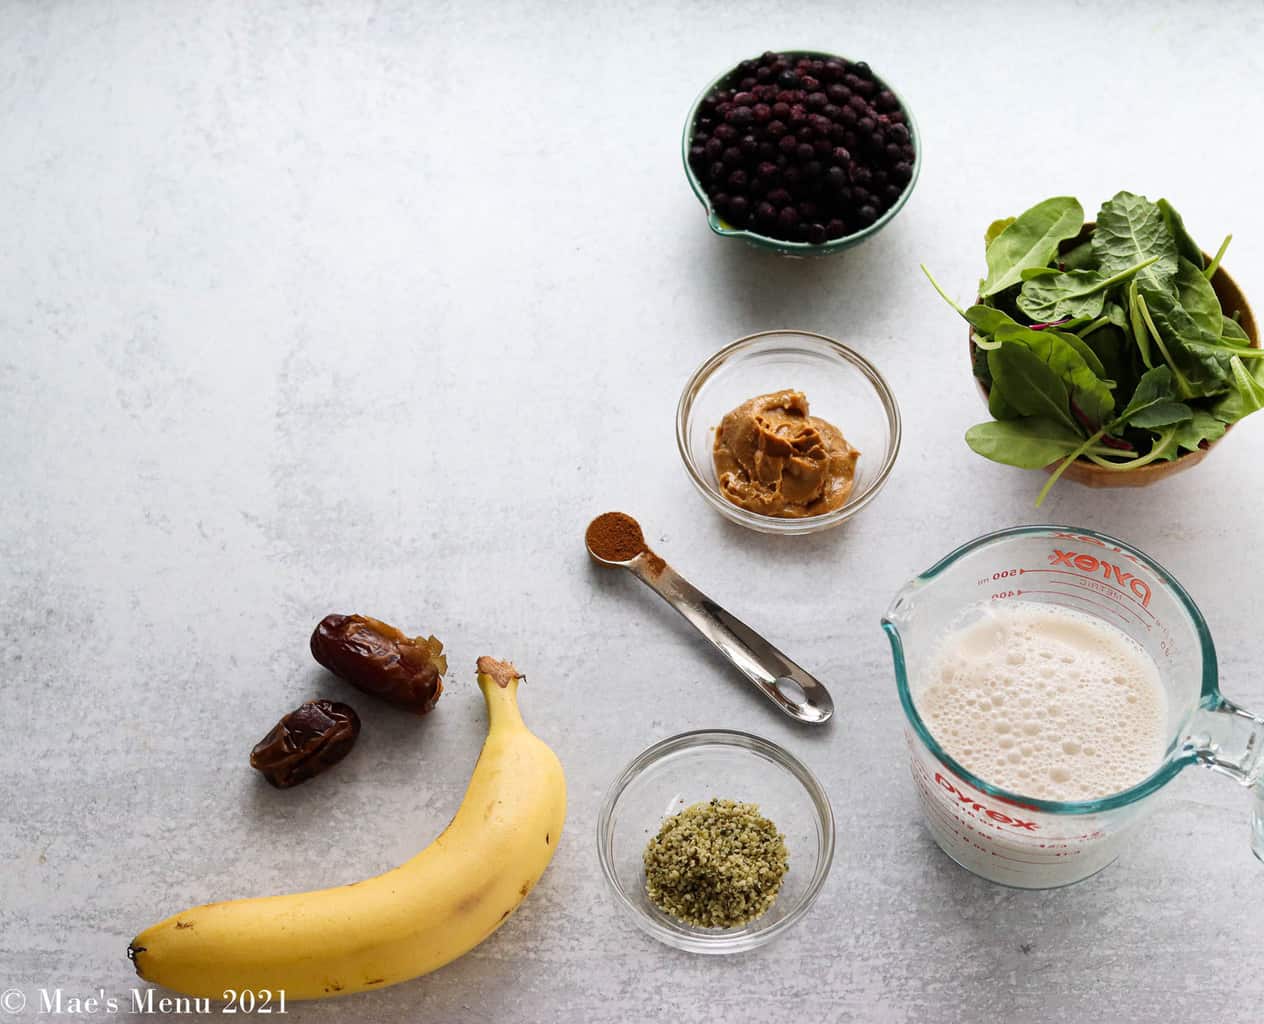 All the ingredients for blueberry spinach smoothie on a concrete counter